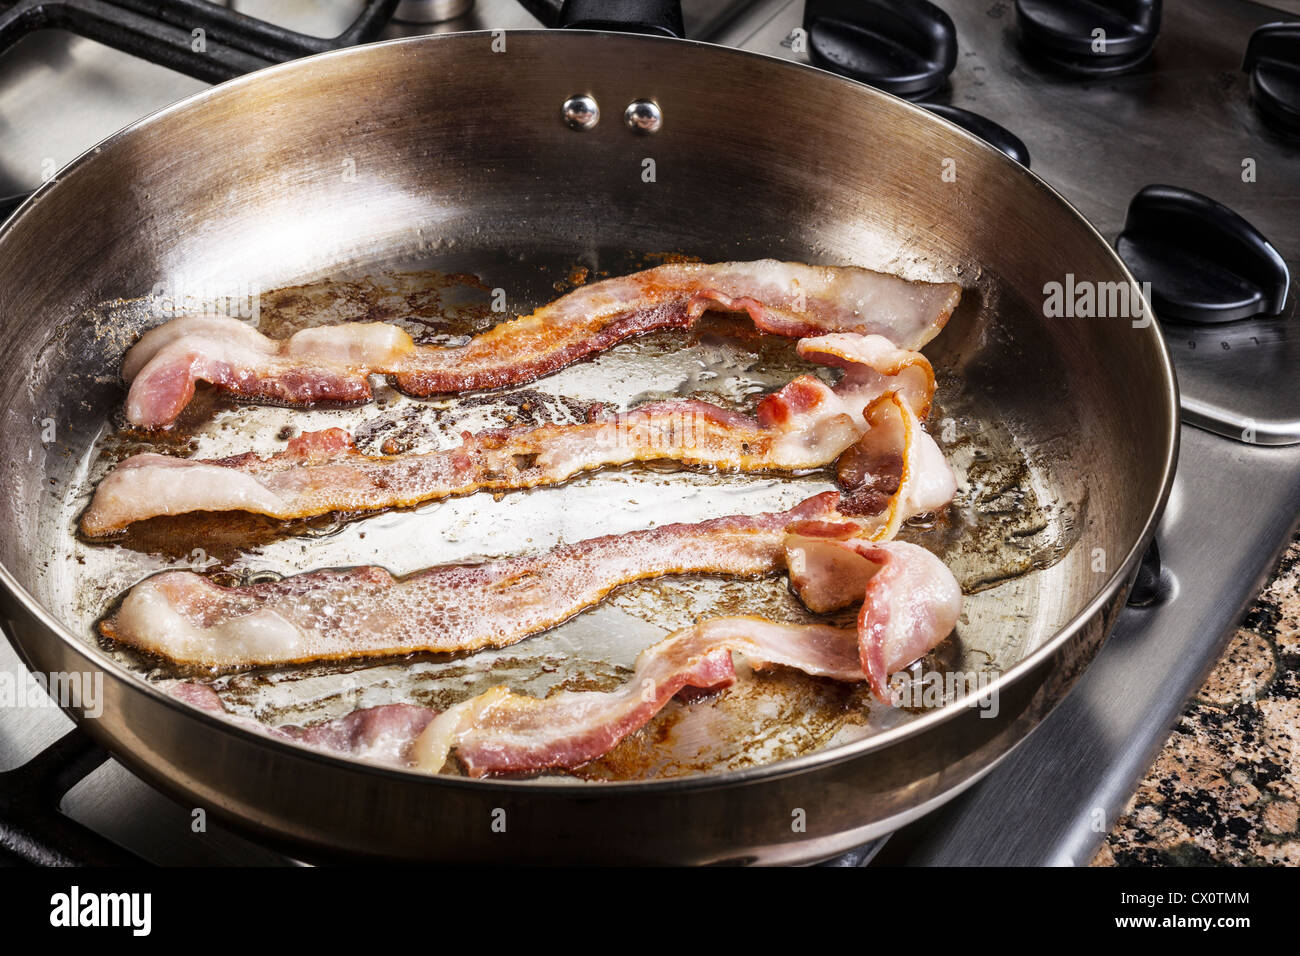 https://c8.alamy.com/comp/CX0TMM/frying-bacon-in-stainless-steel-frying-pan-on-stove-top-CX0TMM.jpg